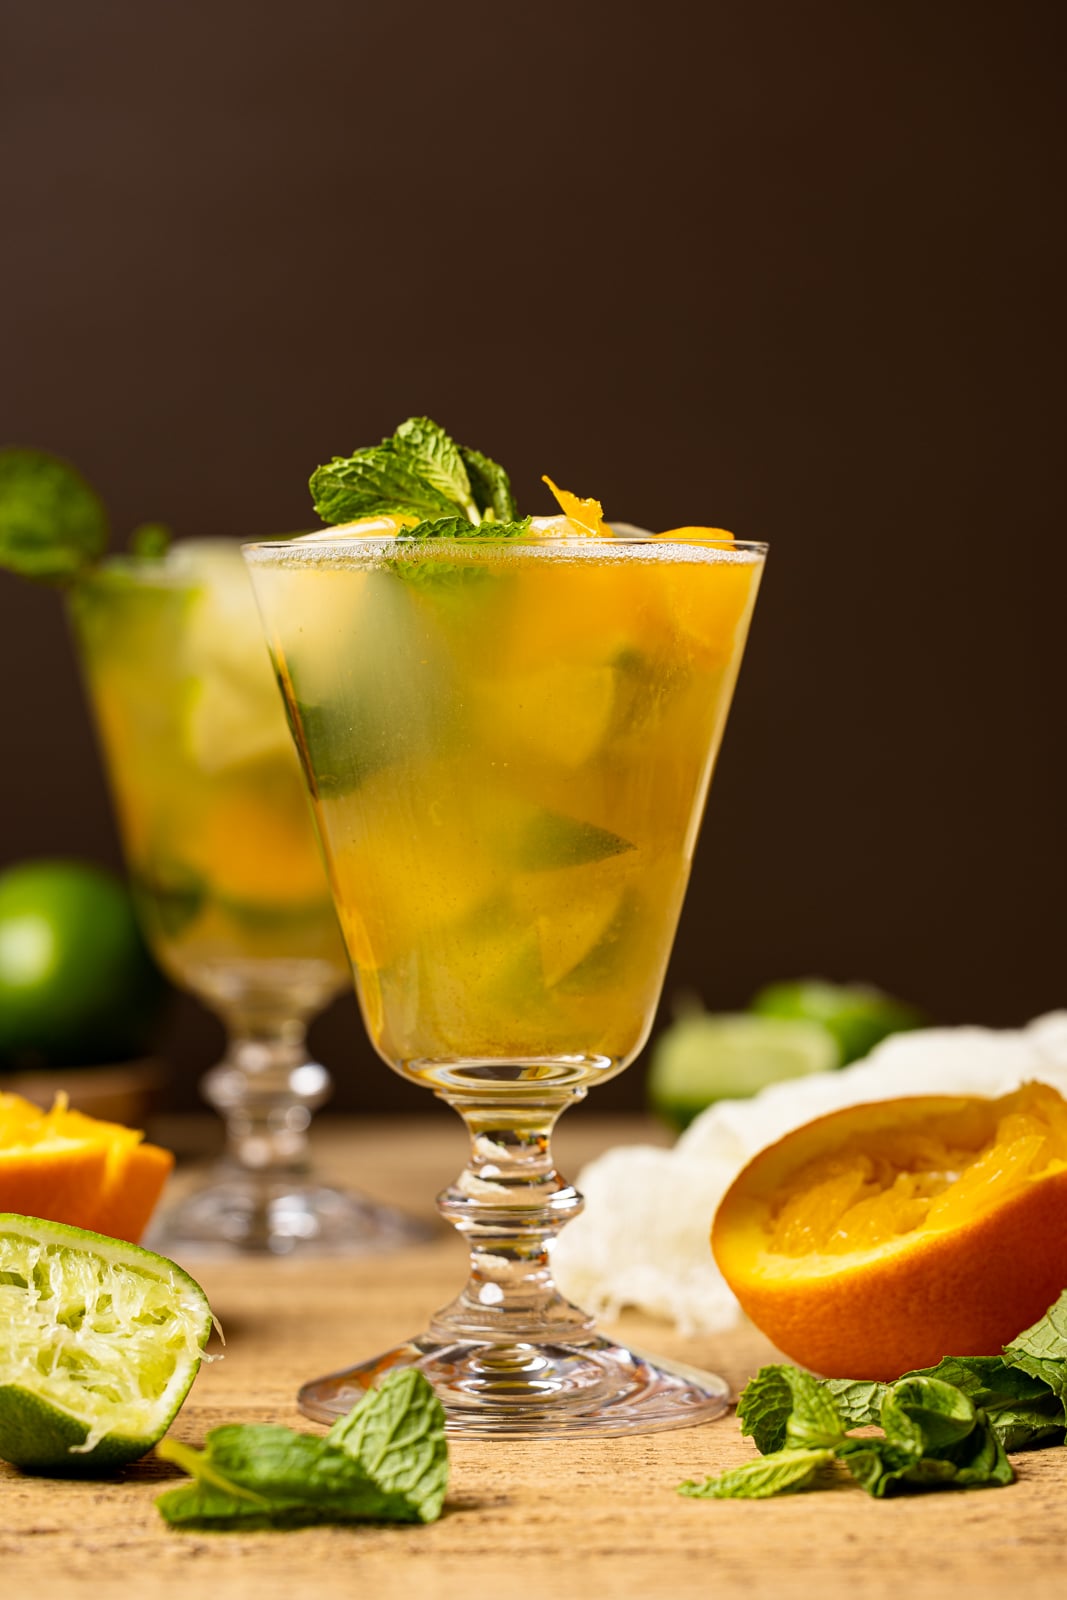 Mocktail in a tall glass on a brown wood table with slices of oranges, lime, mint leaves, with a gold cocktail shaker in the background.